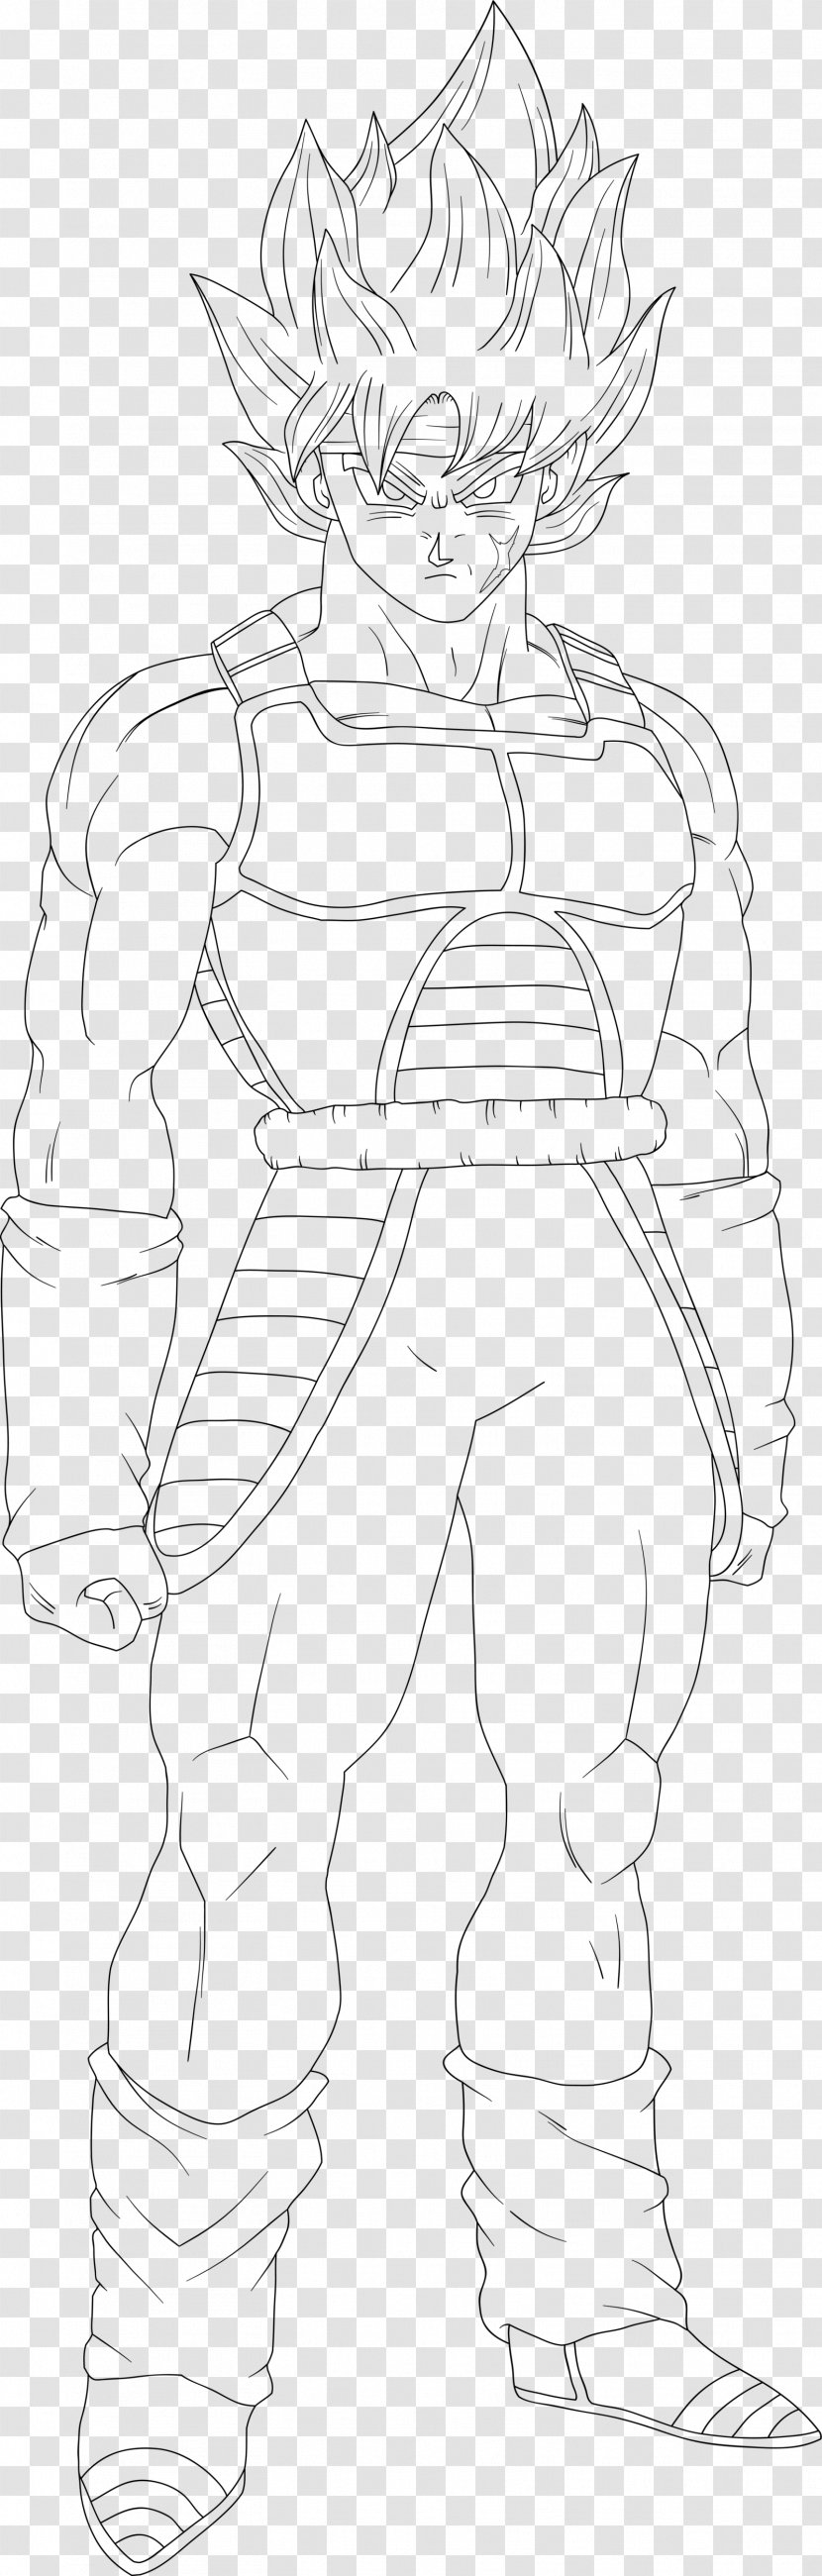 Inker Drawing Line Art Cartoon Sketch - Dragon Ball With Color Transparent PNG